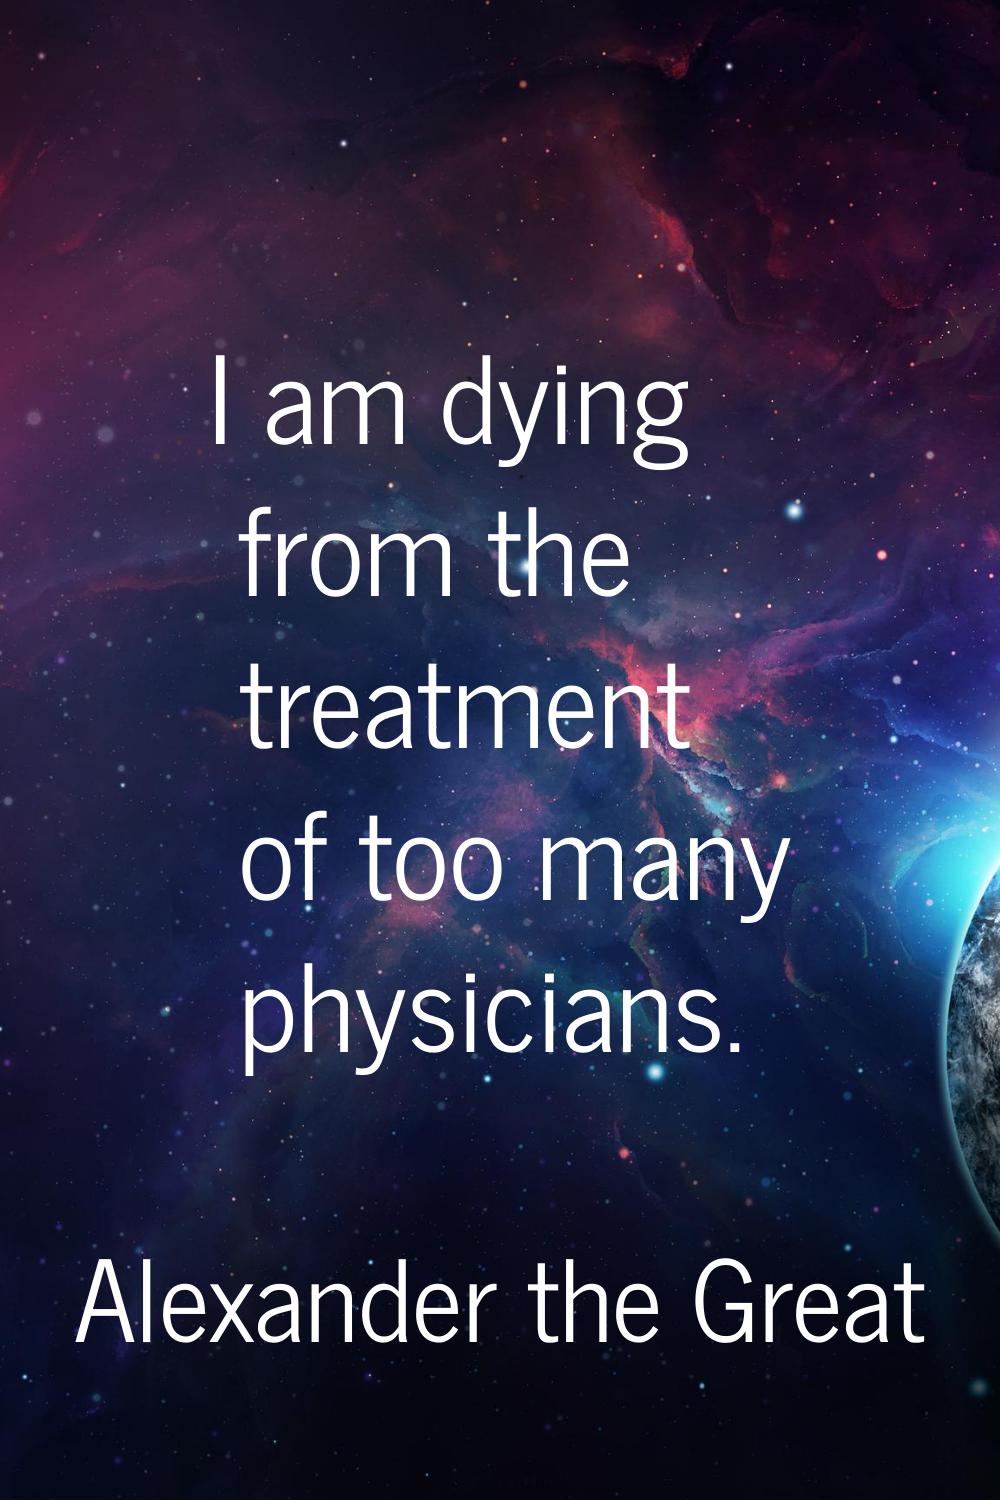 I am dying from the treatment of too many physicians.